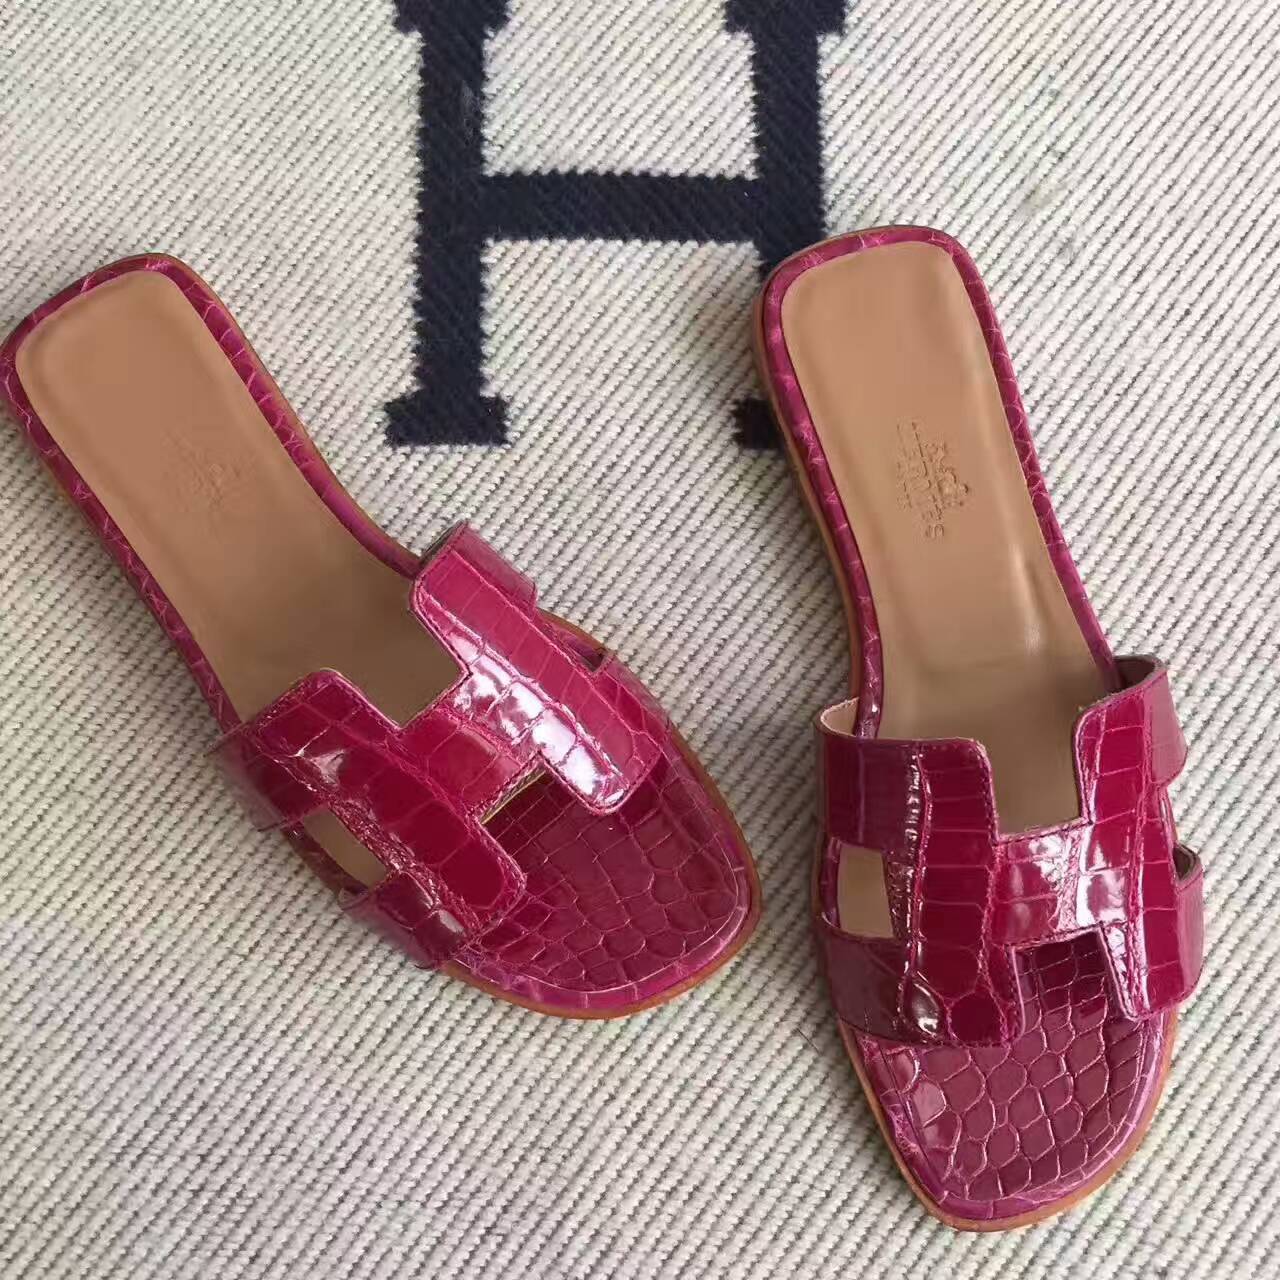 New Arrival Hermes Sandals Shoes in N5 Fuchsia Crocodile Leather Size35#